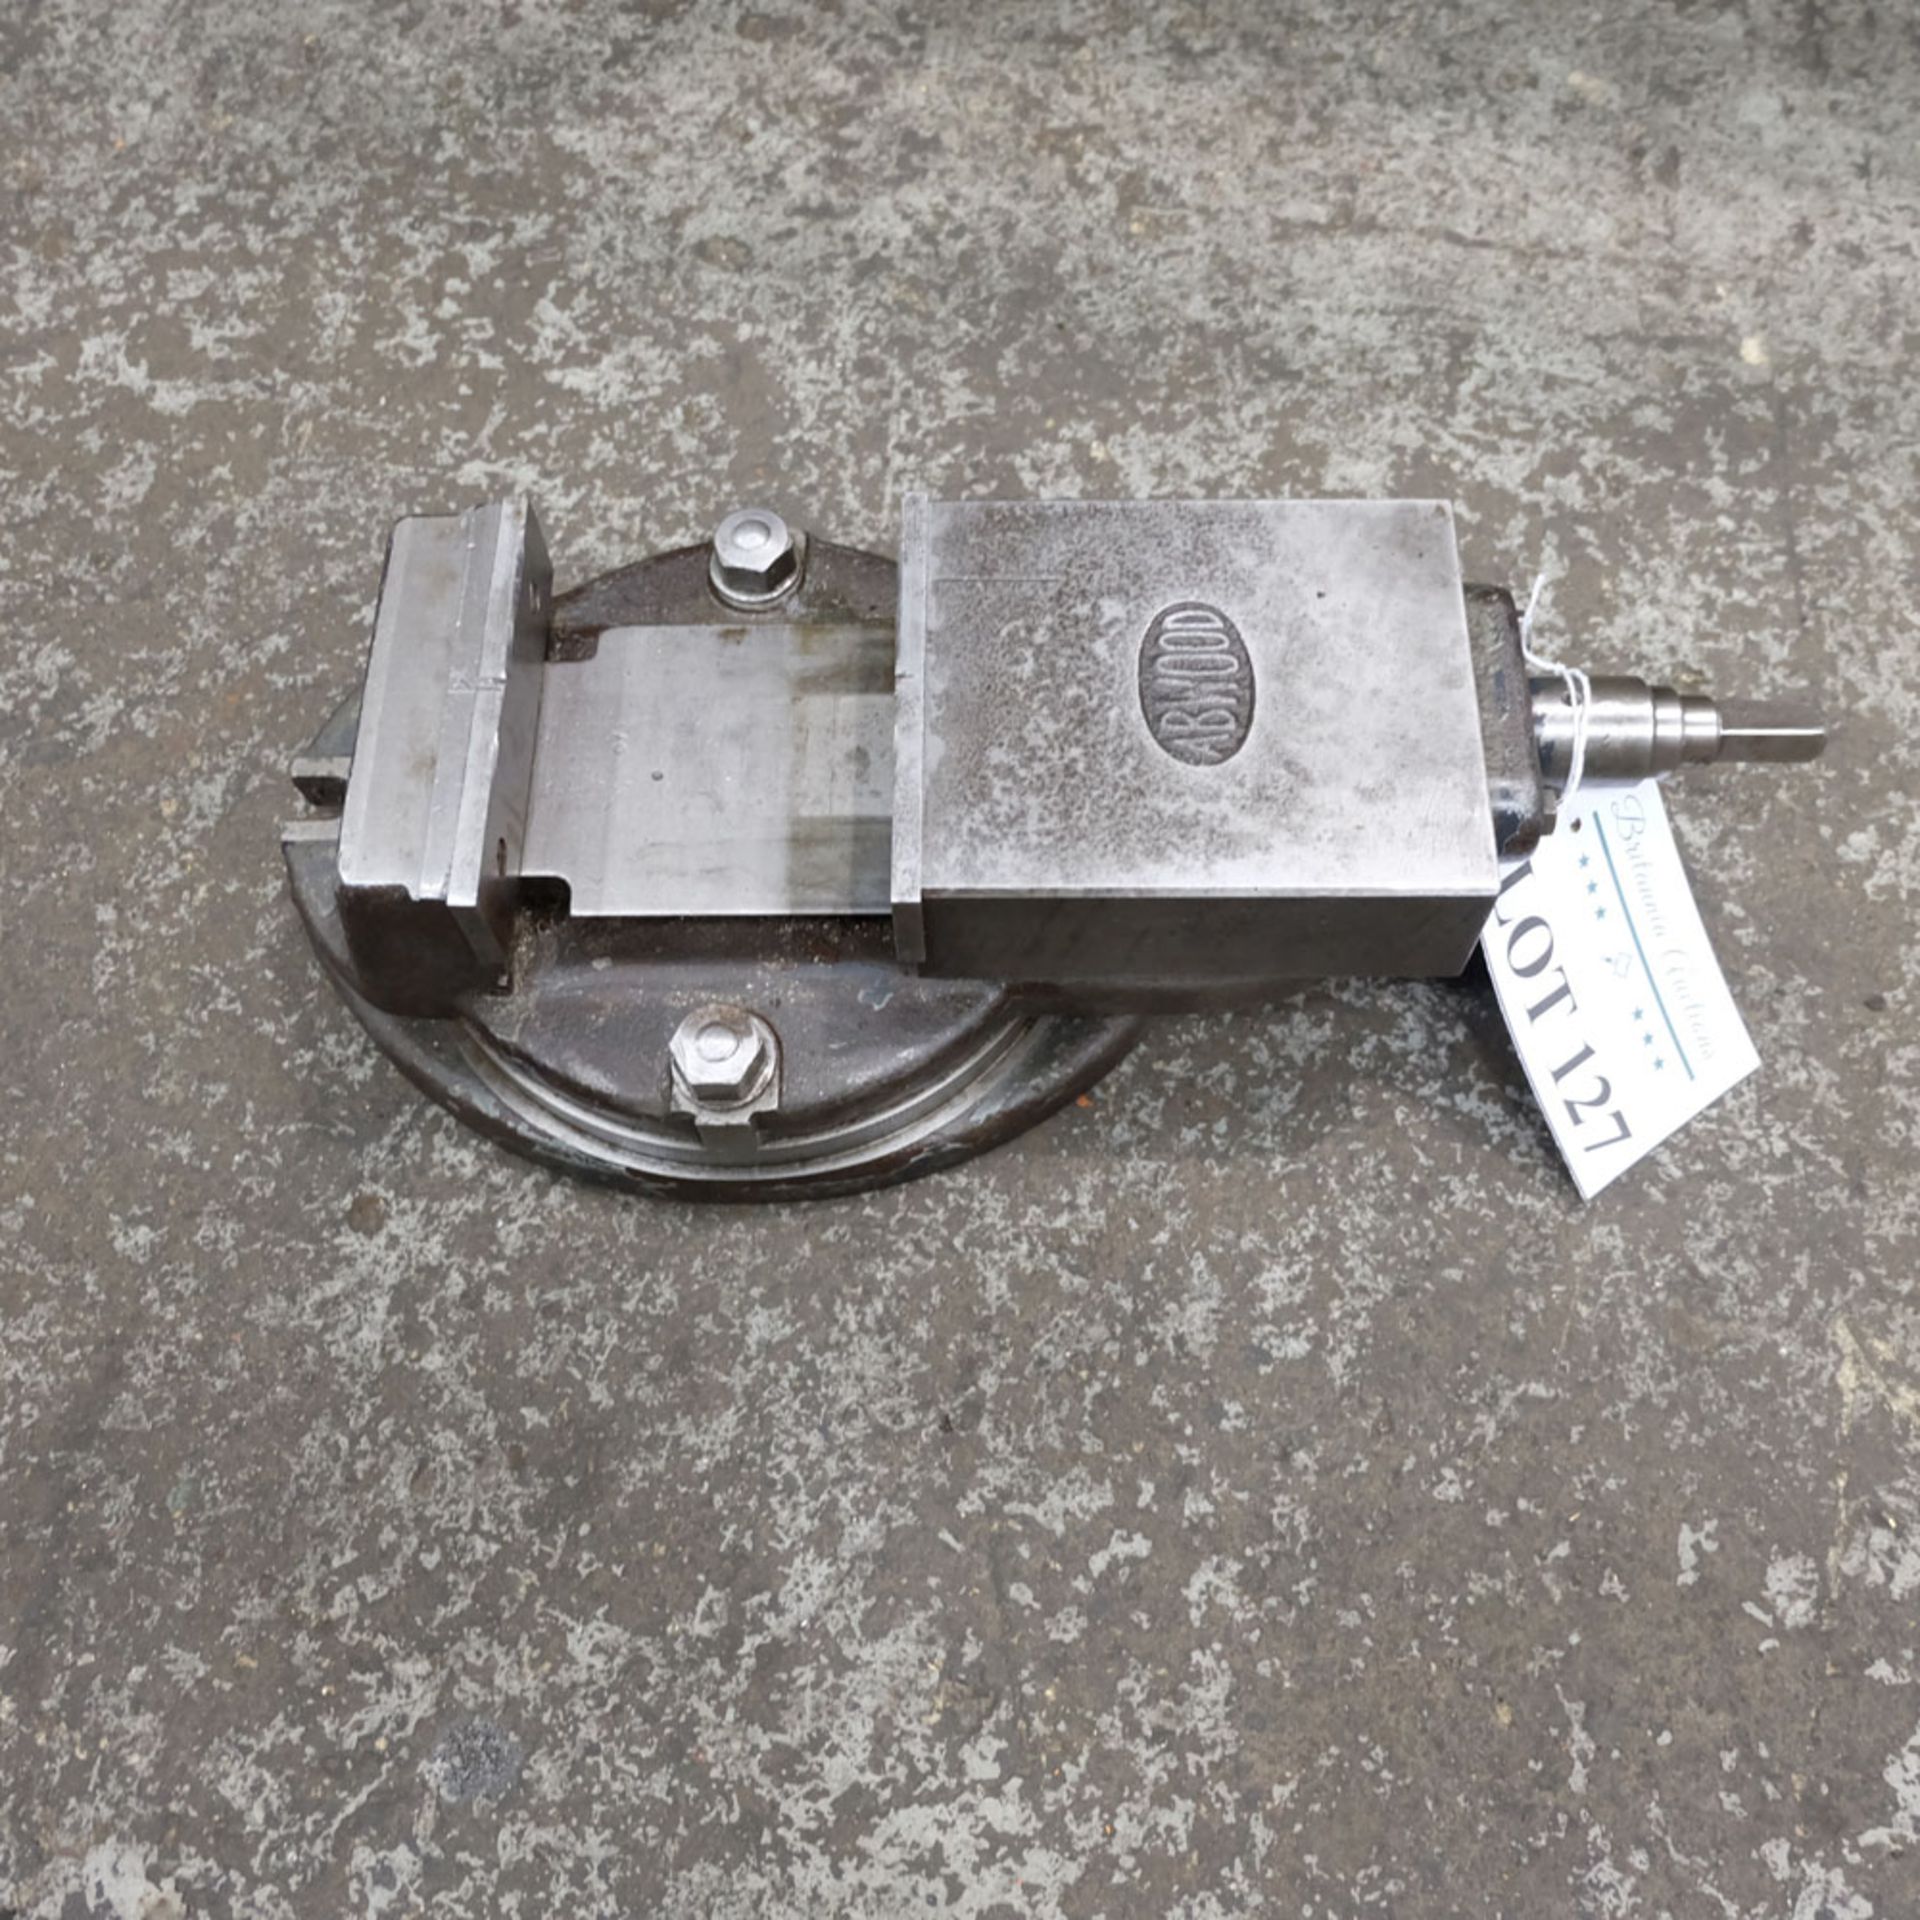 ABWOOD Swivelling Machine Vice. Approx Measurements - Jaws 6 1/4". Max Opening 5".